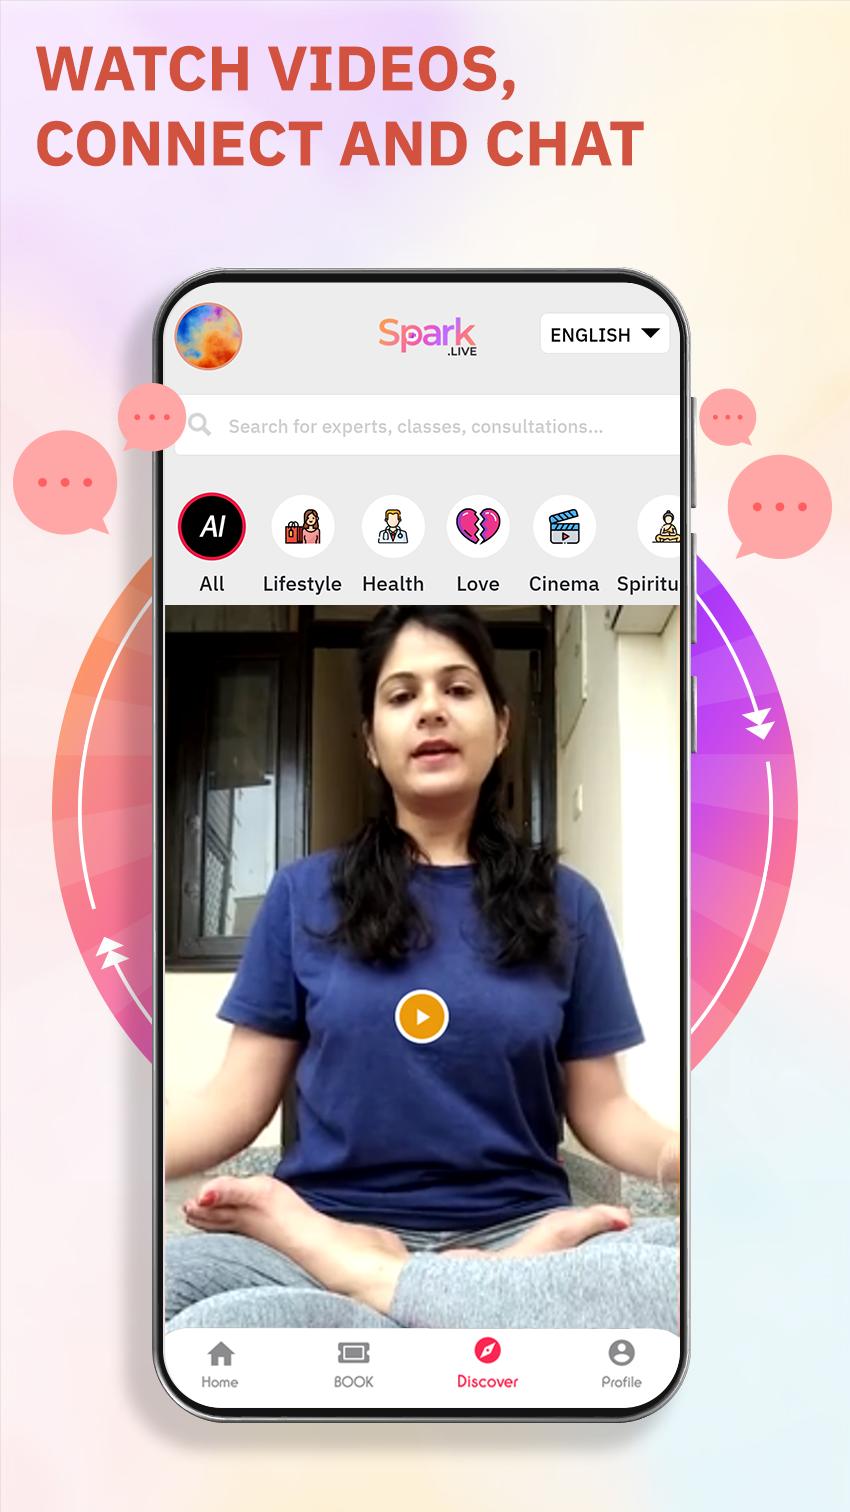 Spark.Live Live Video Classes and Consultations 9.3.37 Screenshot 1